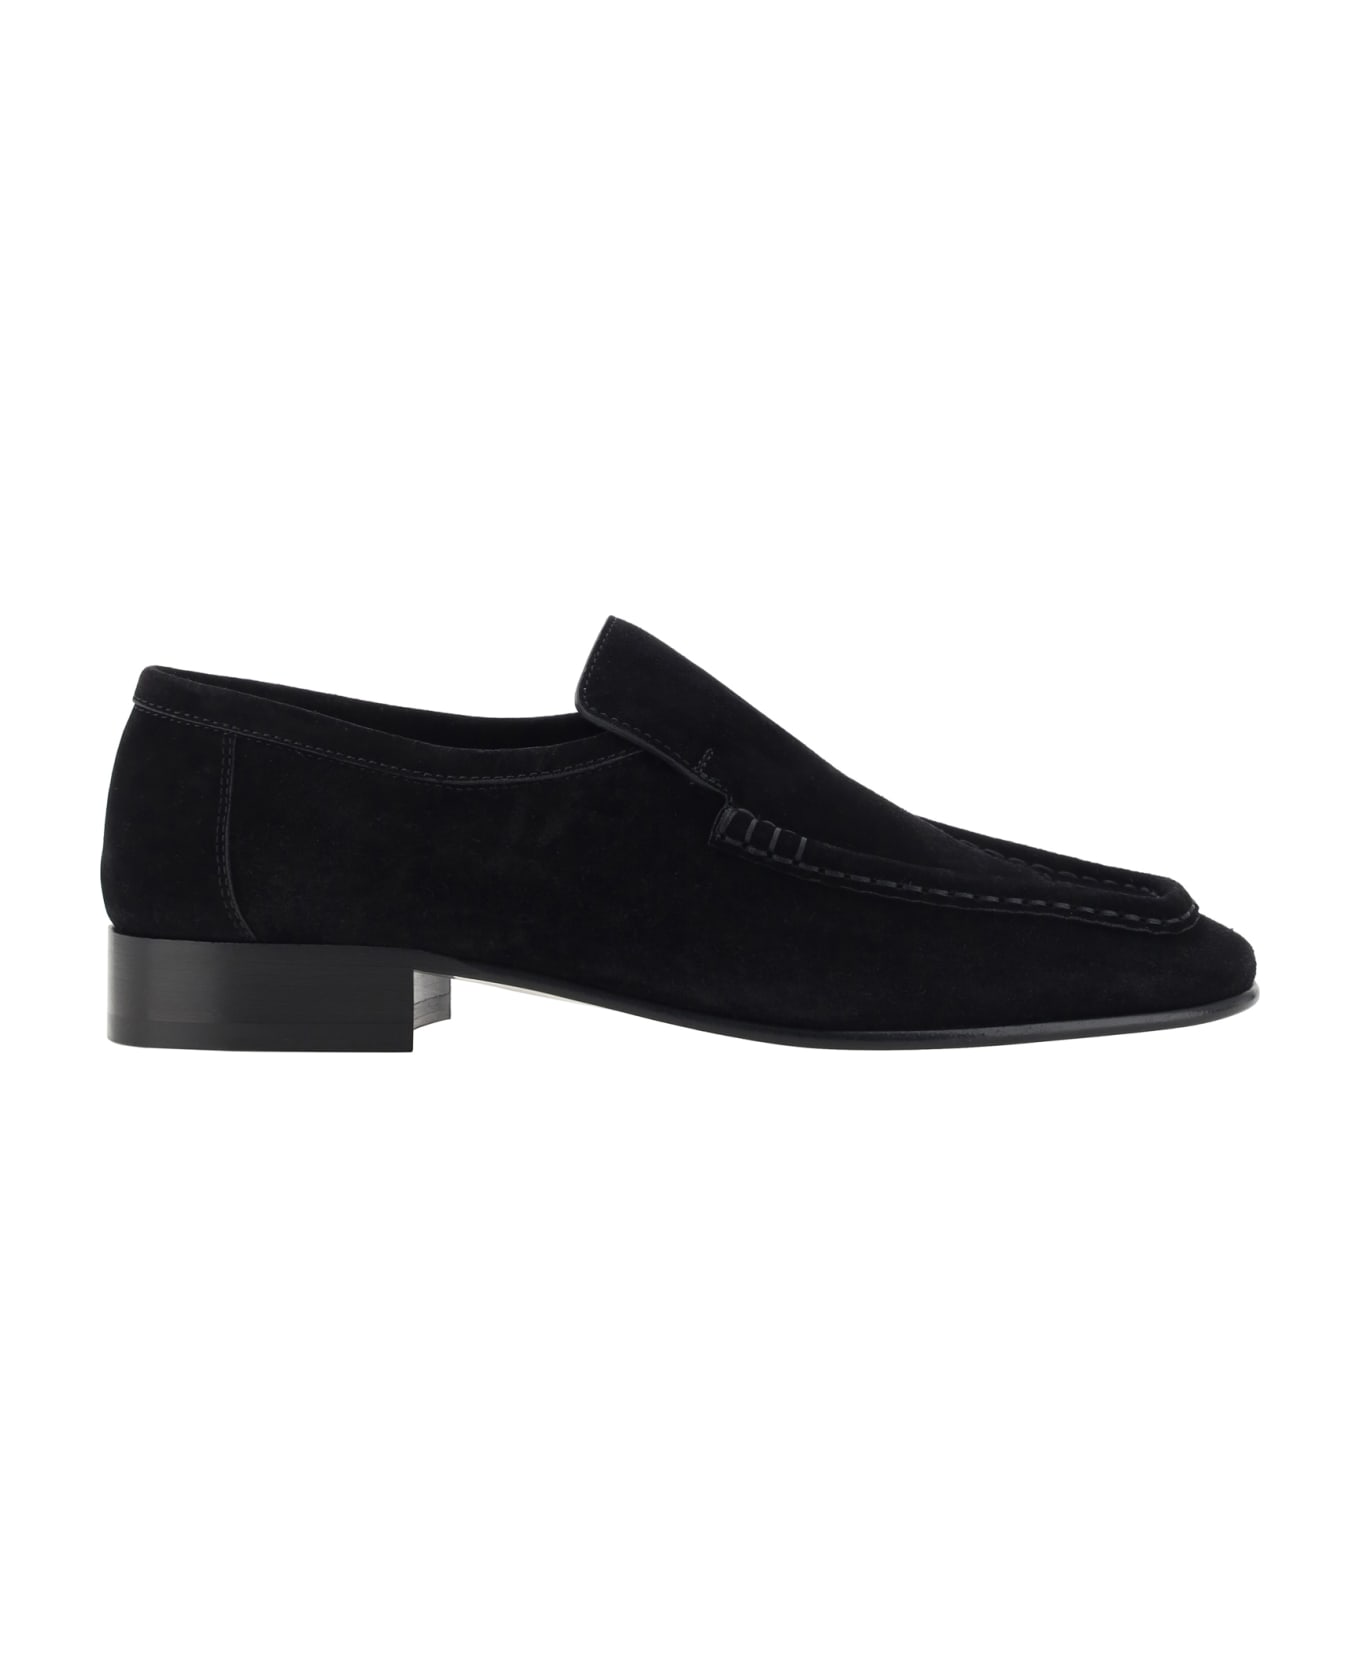 The Row New Soft Loafers - Black